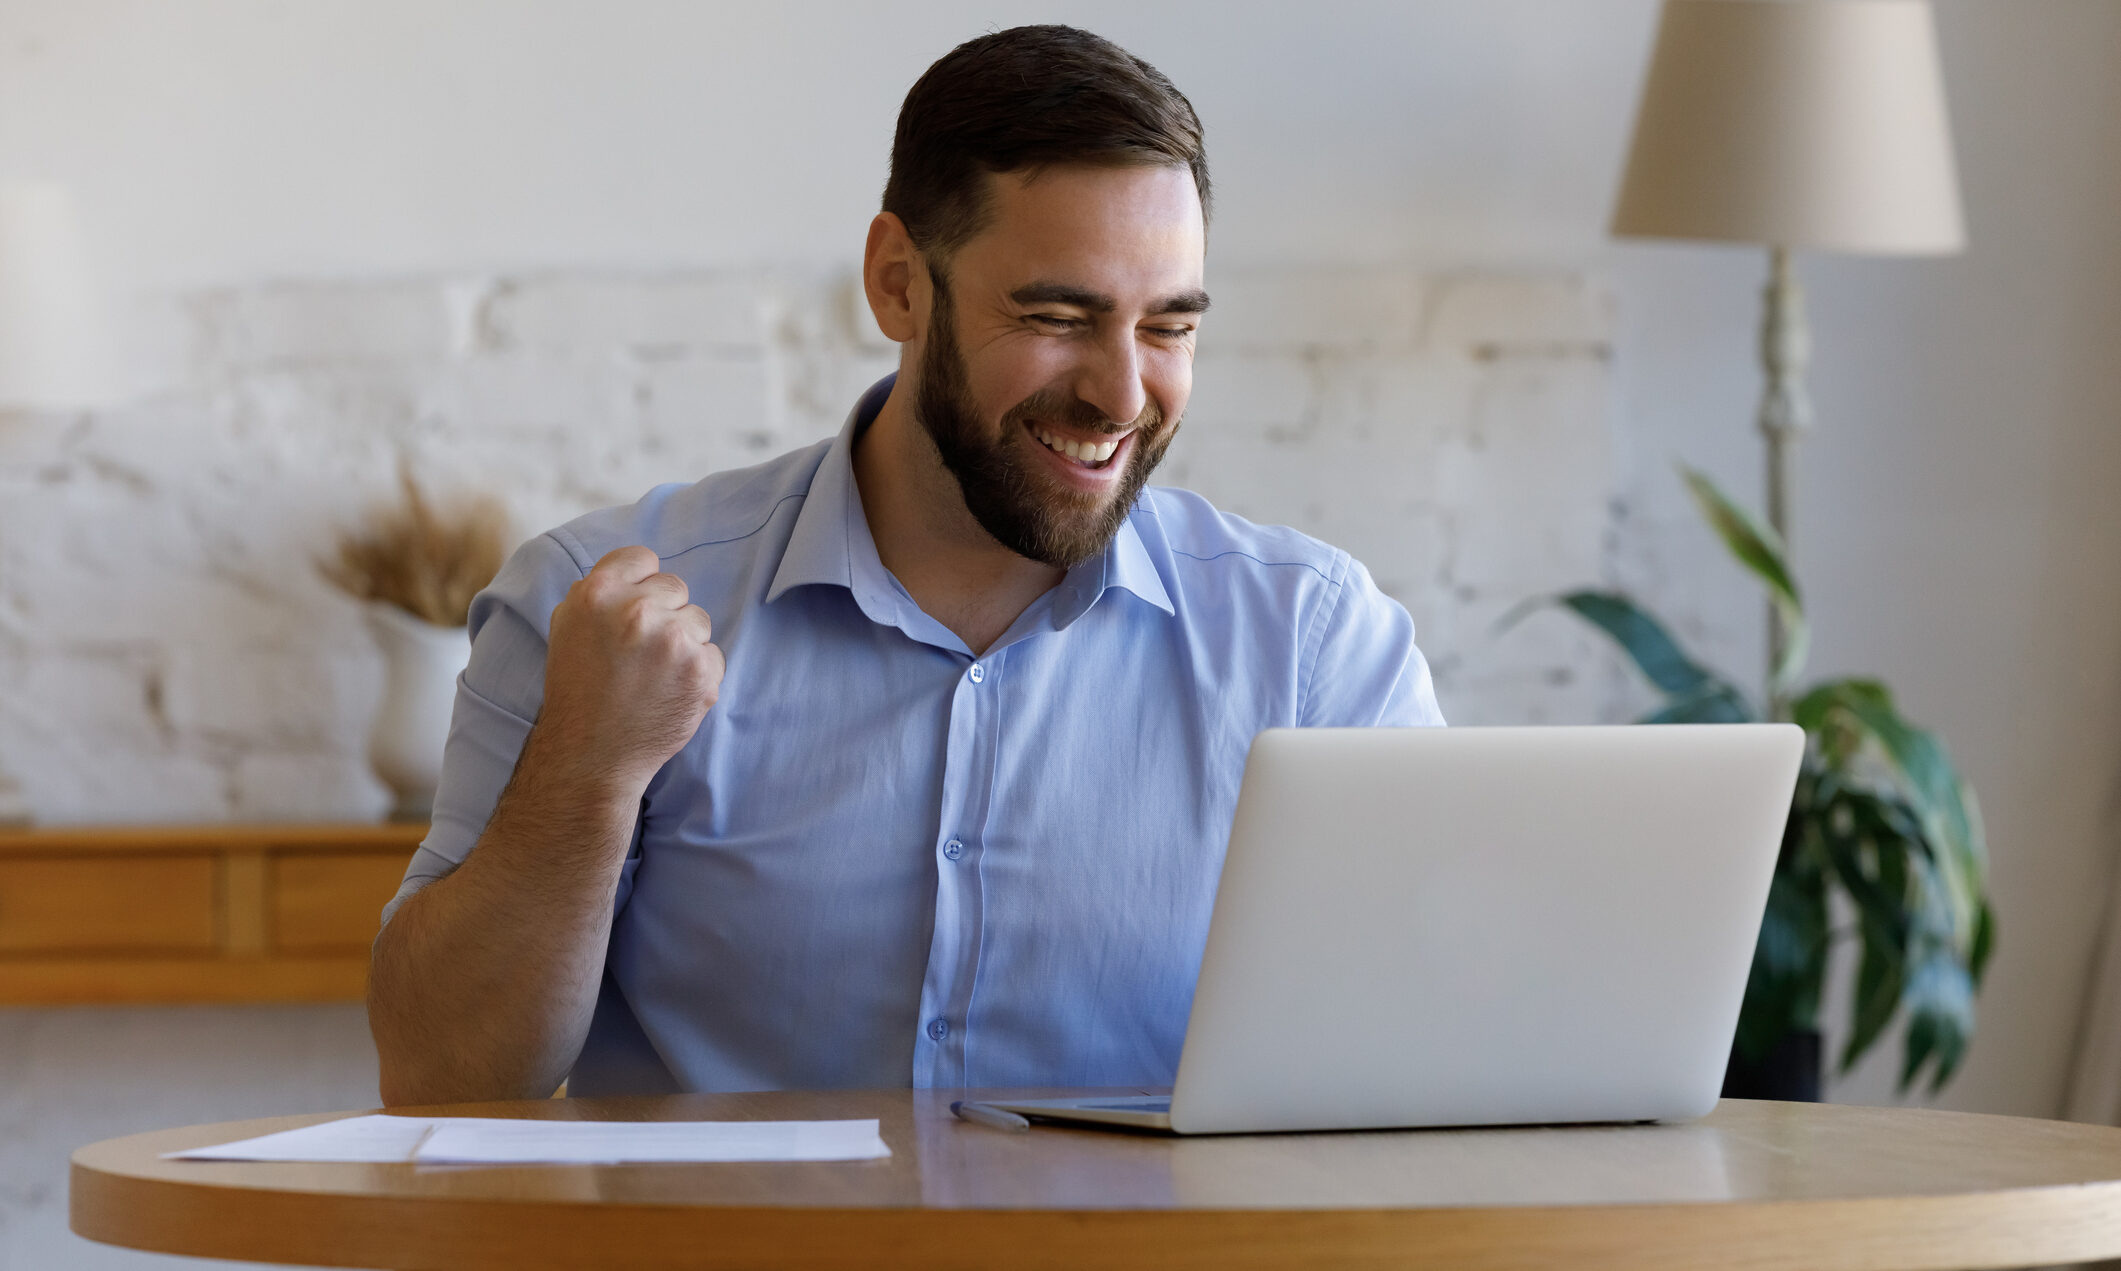 Excited happy guy getting good news, looking at laptop display